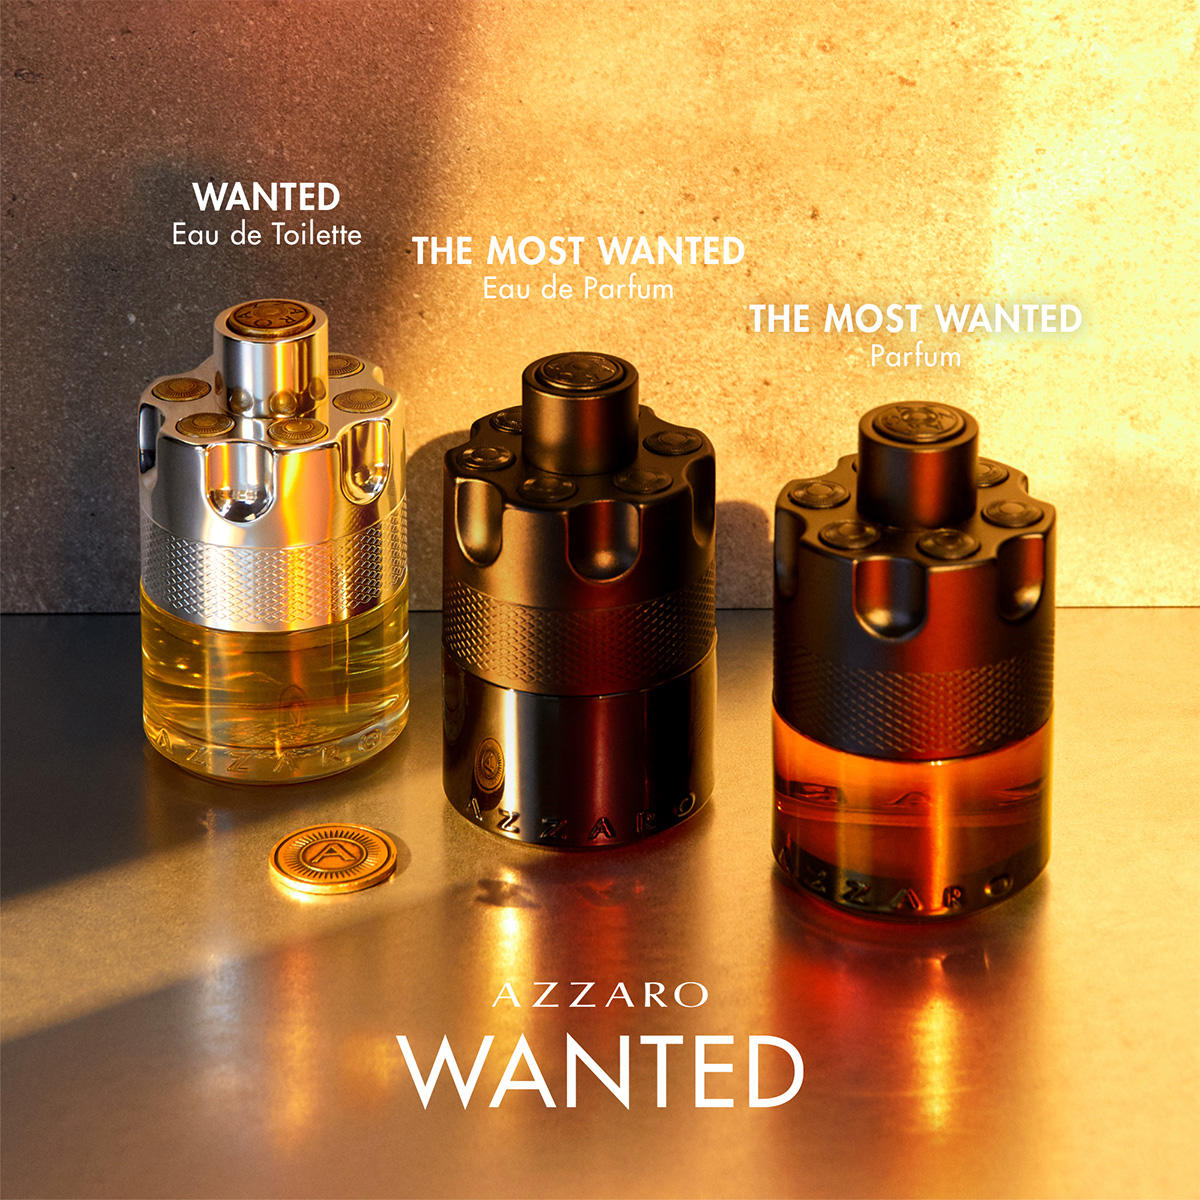 Azzaro Wanted The Most Le Parfum 100 ml - 5